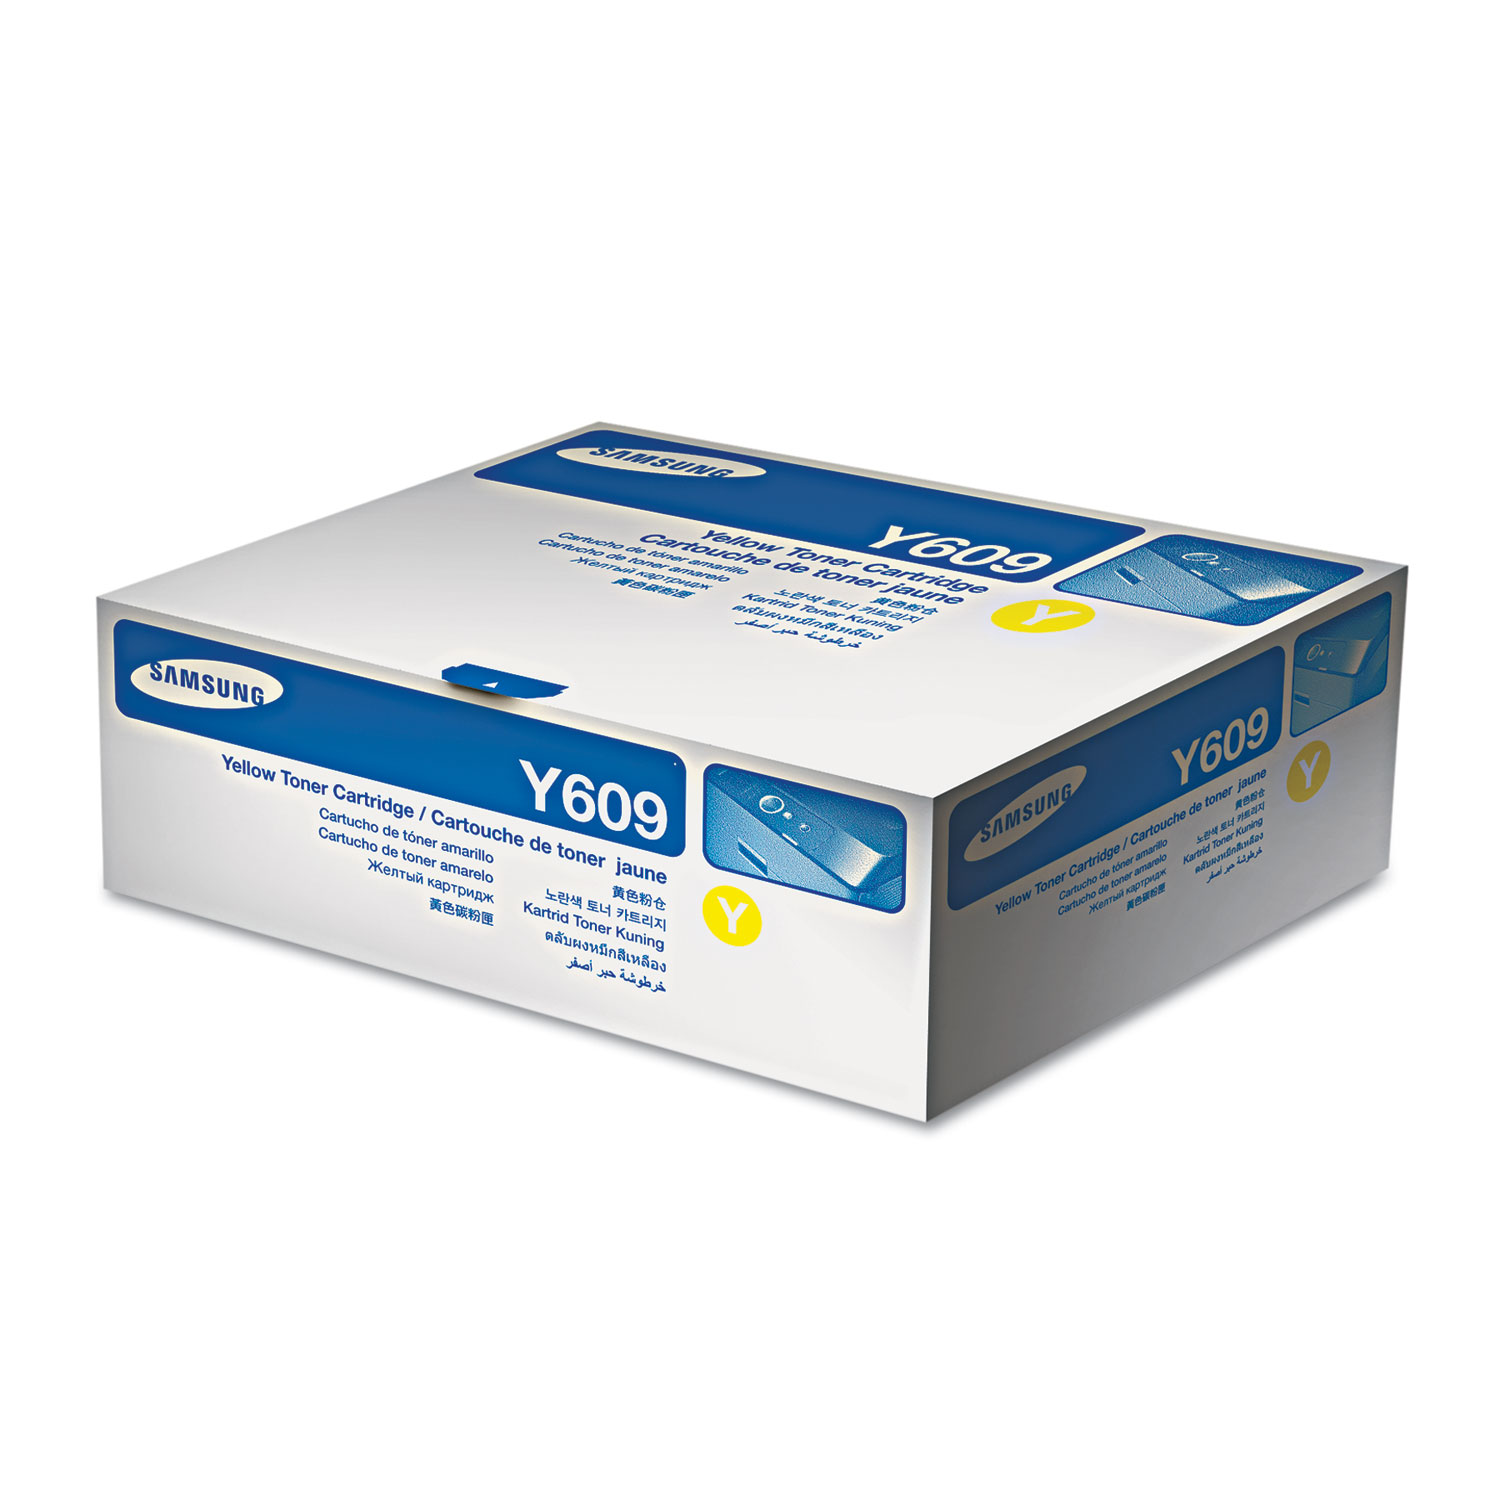 CLTY609S High-Yield Toner, 7,000 Page Yield, Yellow